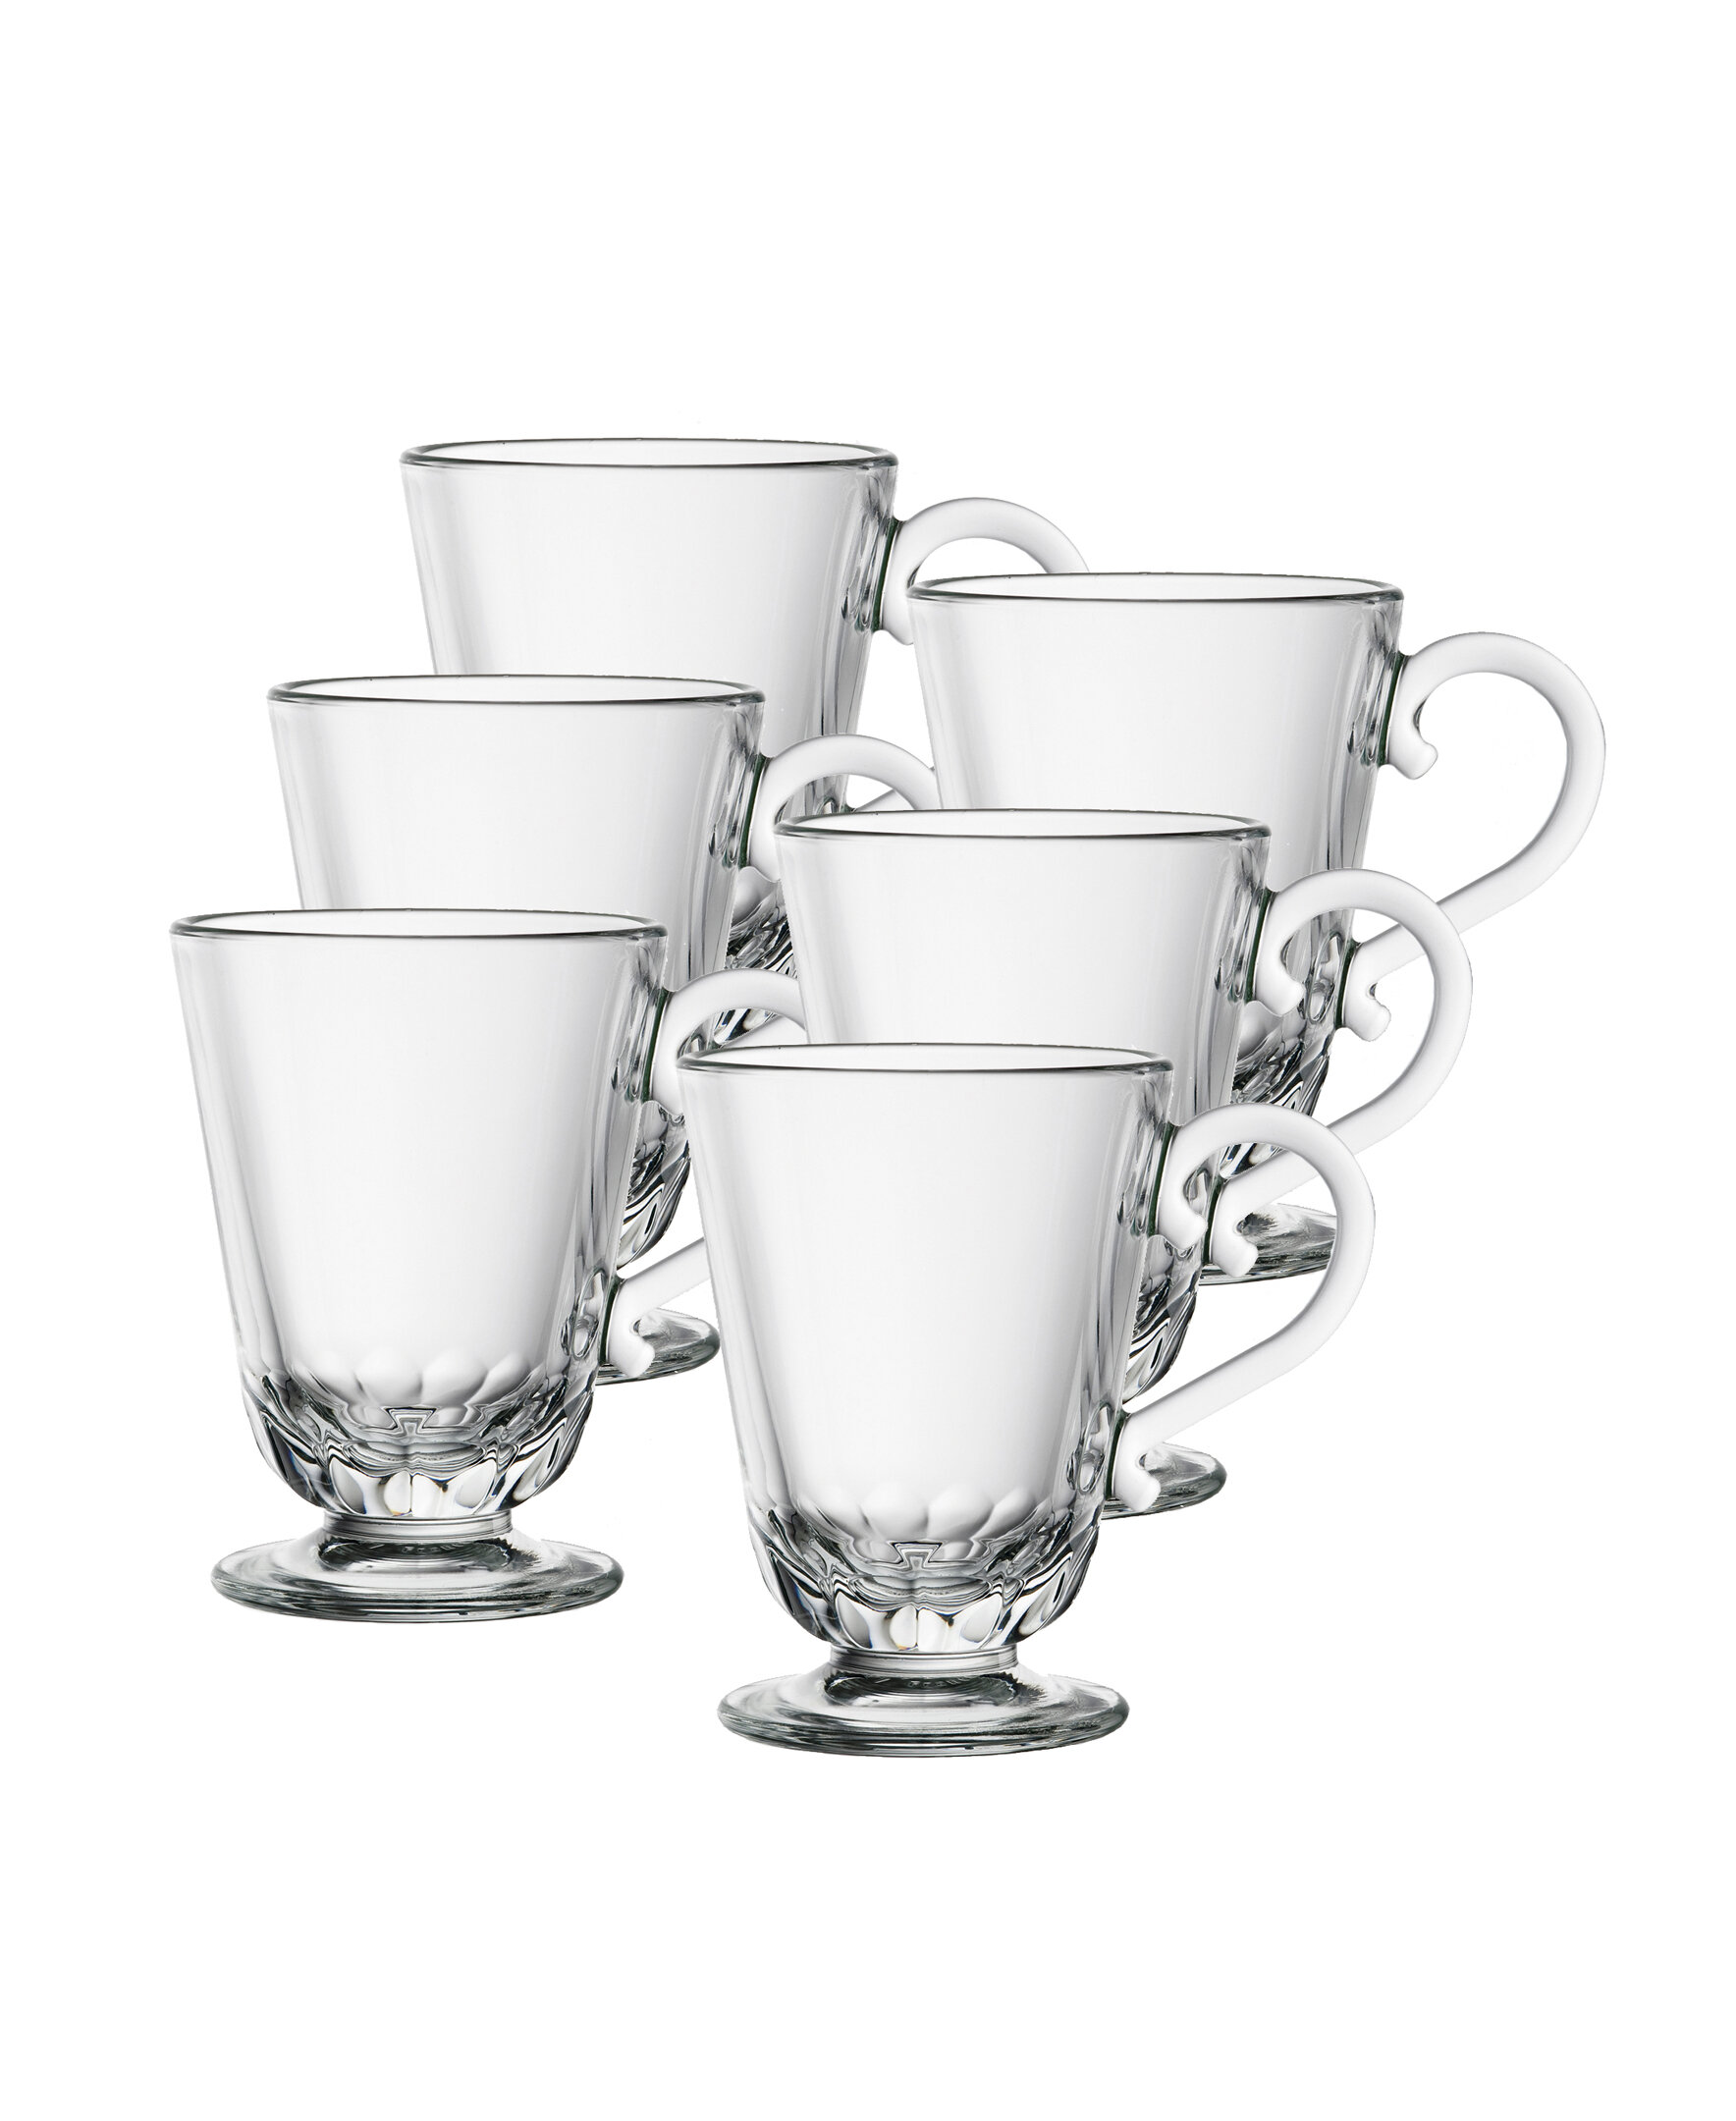 Godinger Coffee Mugs, Tea or Hot Water Glass Cups - Dublin Collection, Set  of 4, 10 fluid ounces